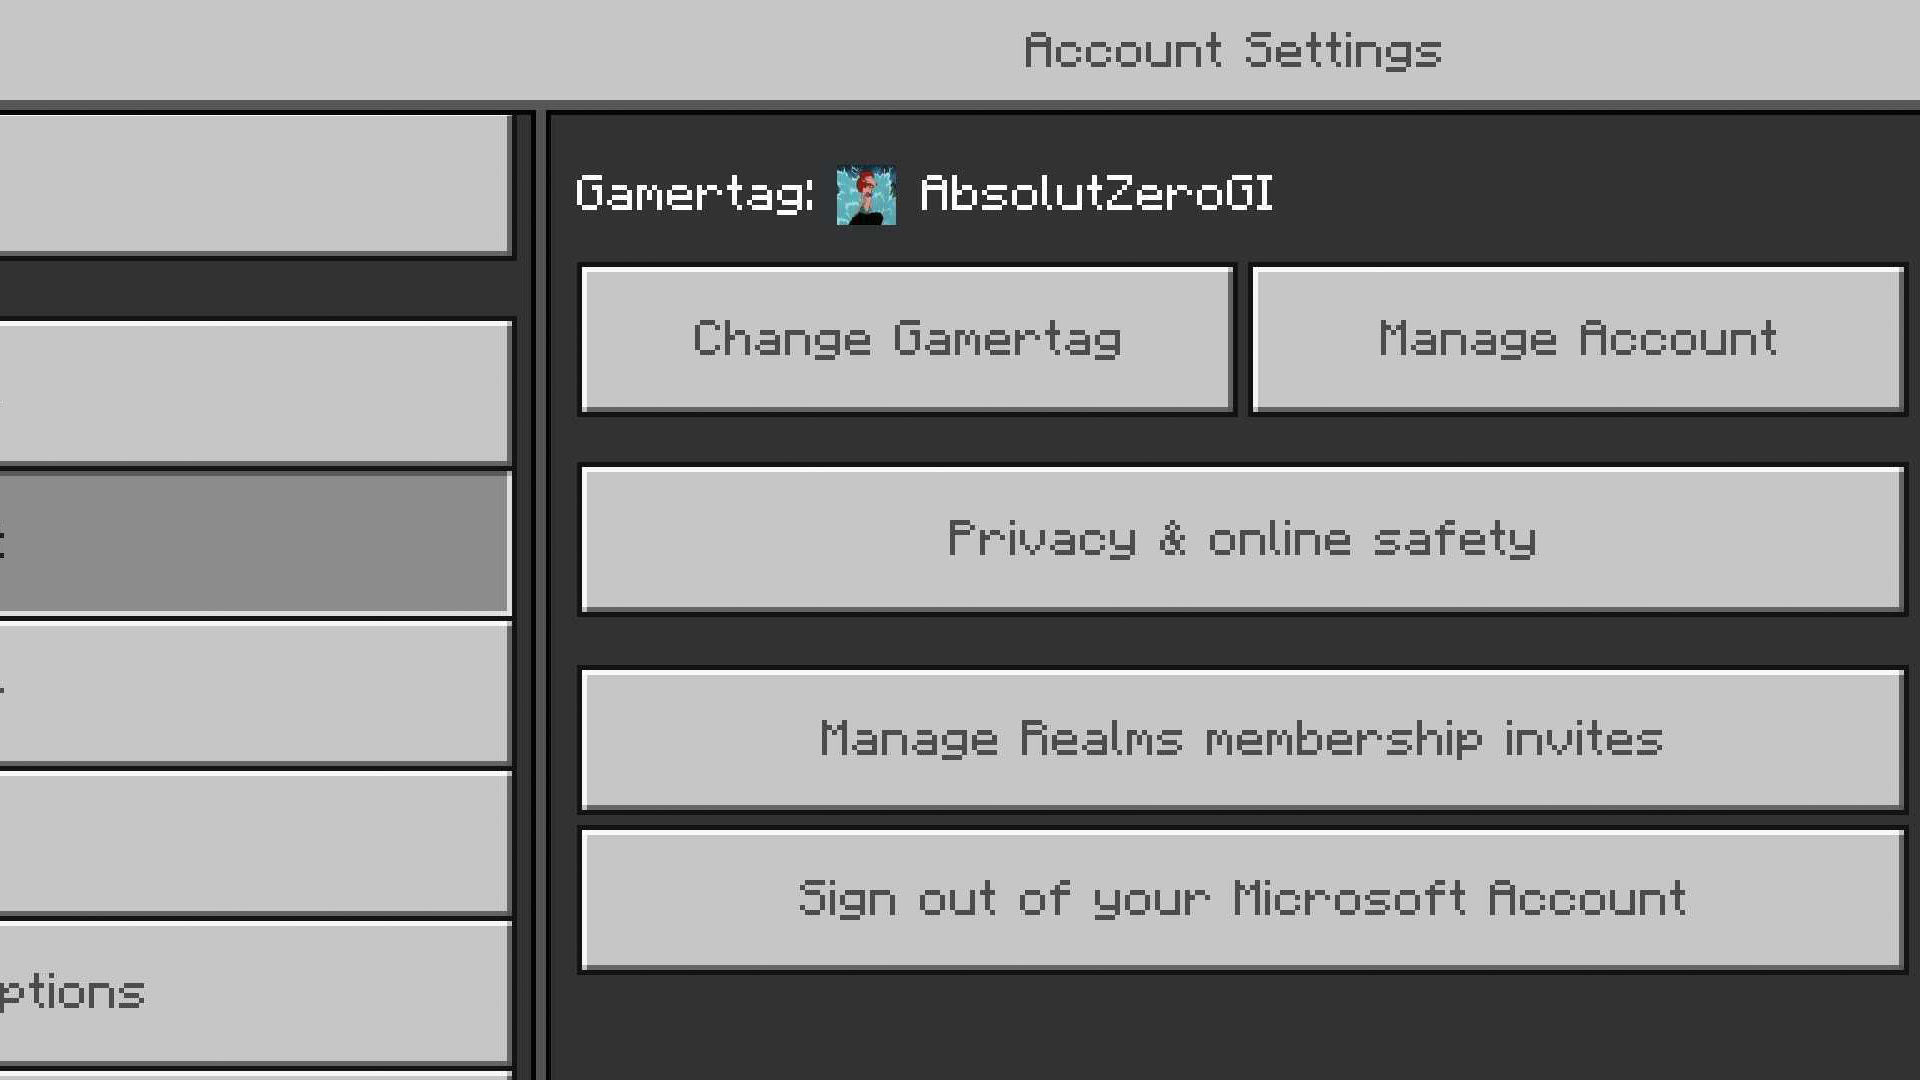 How to Change Your Xbox Gamertag on PC! 